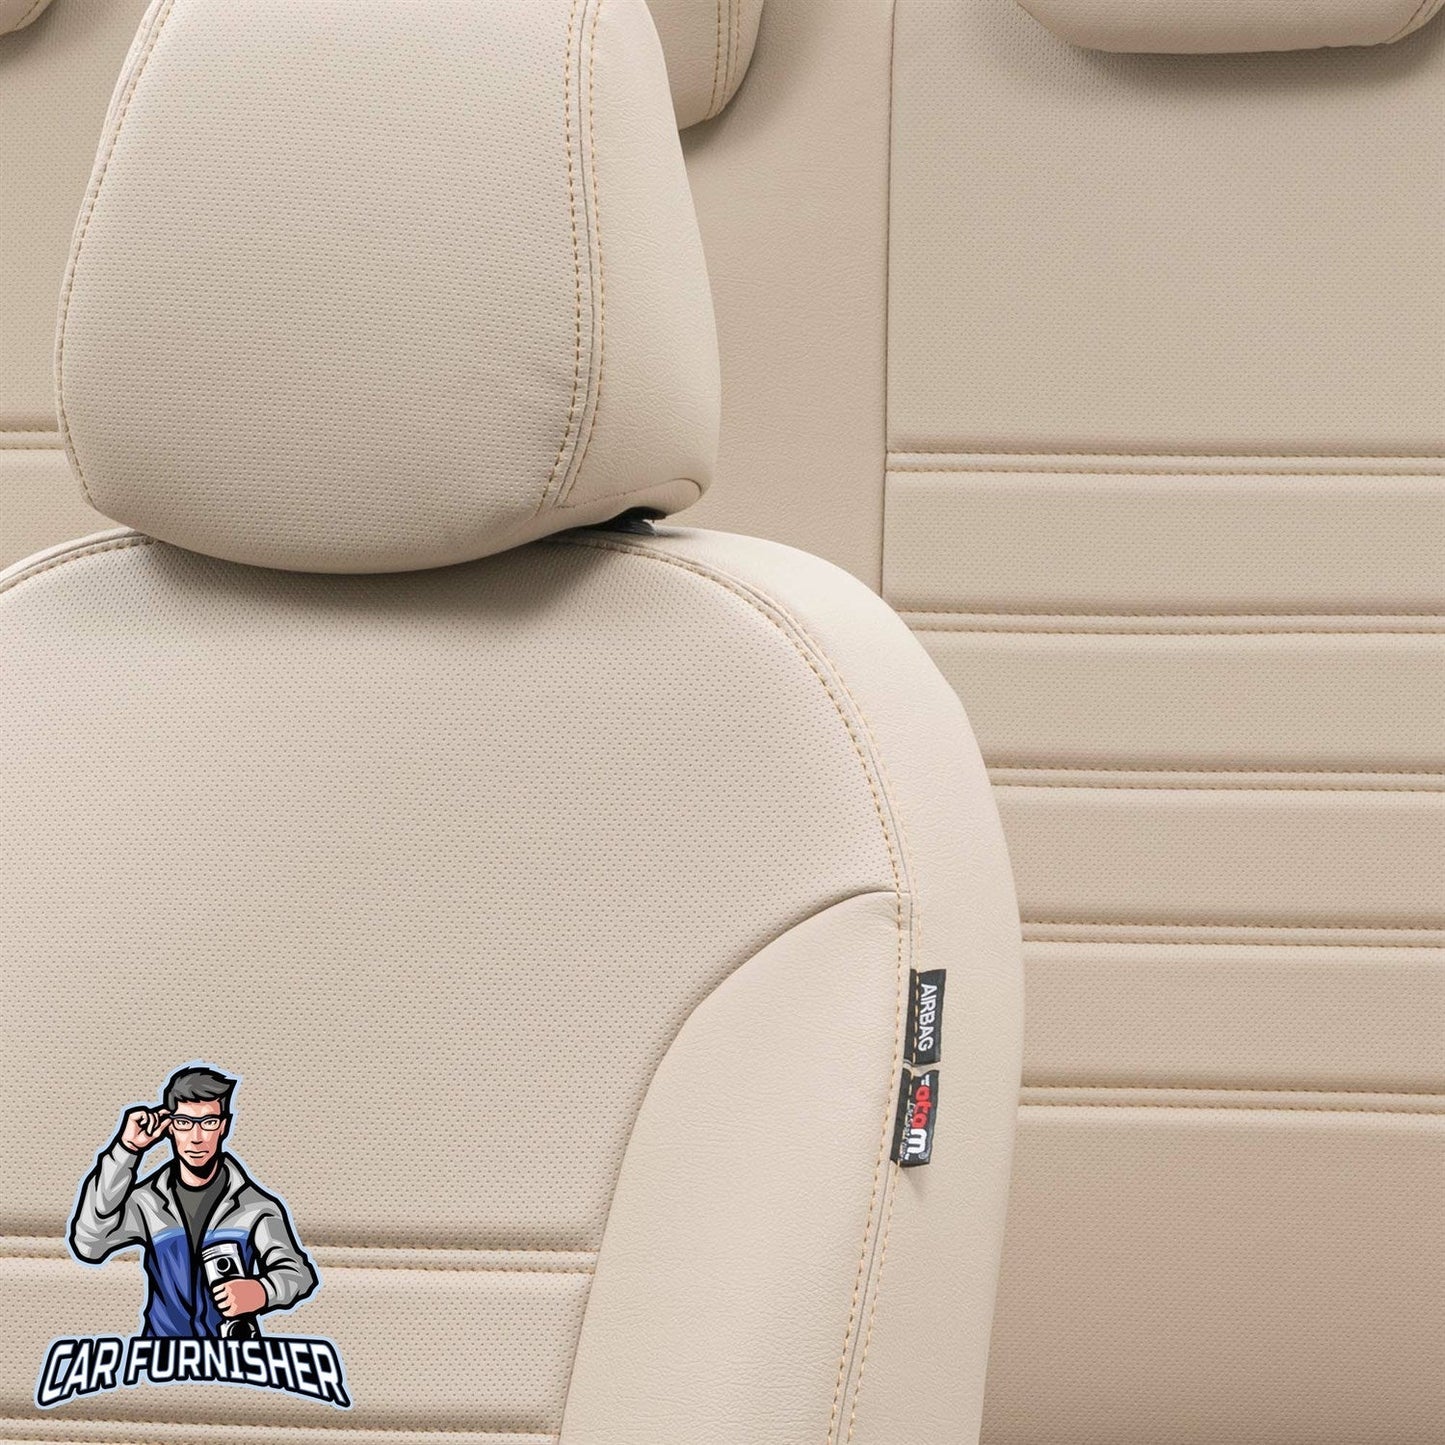 Hyundai Accent Seat Covers Istanbul Leather Design Beige Leather